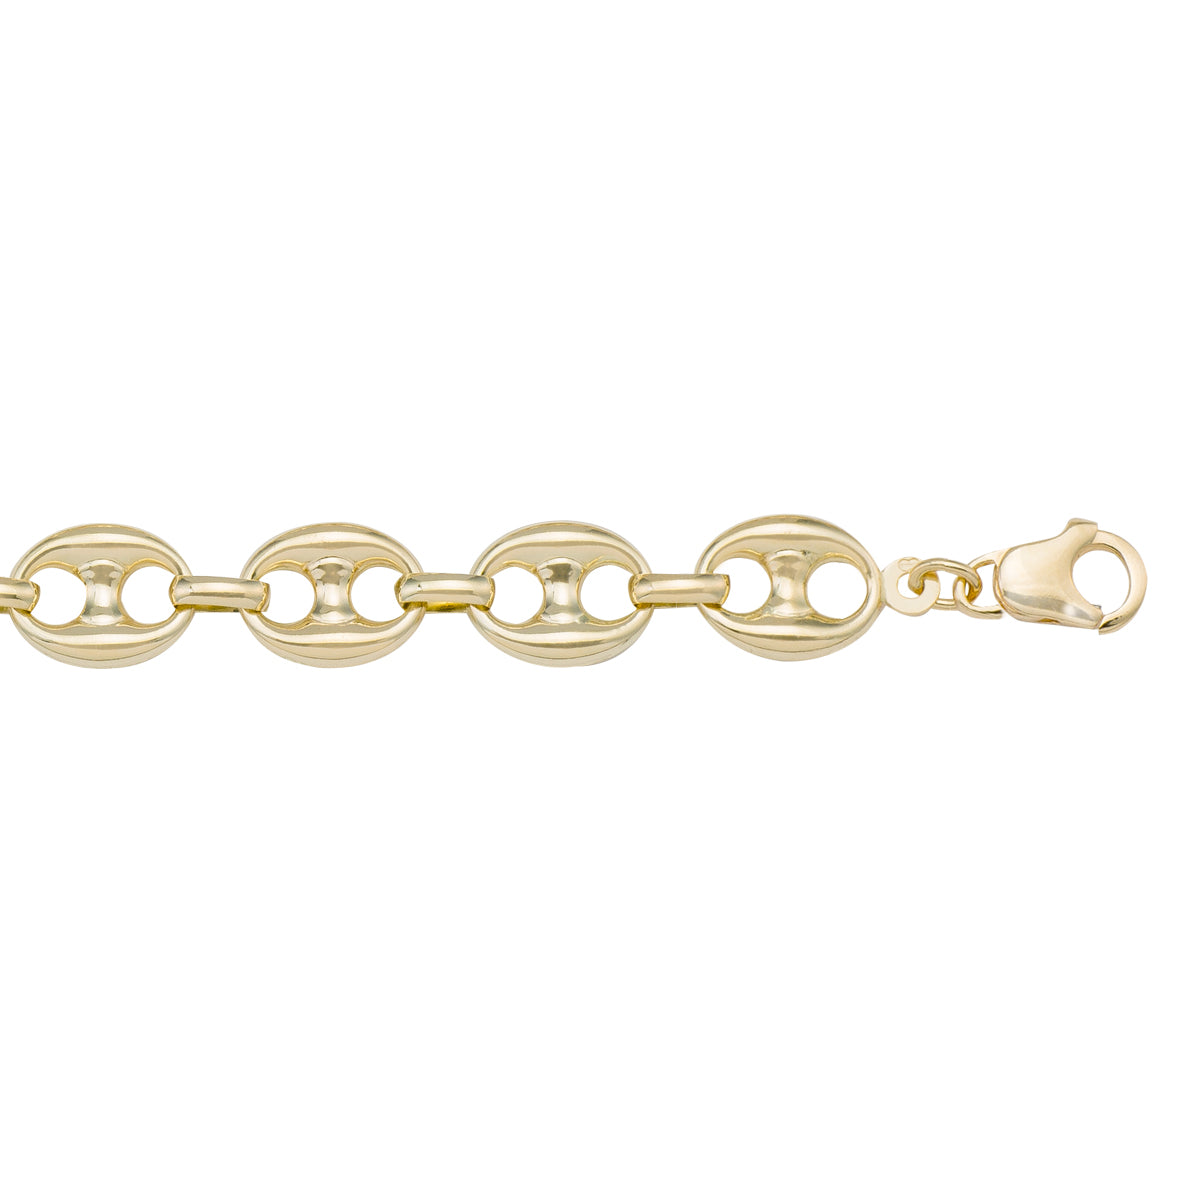 BRACELETS YELLOW GOLD HOLLOW PUFFED ANCHOR LINK